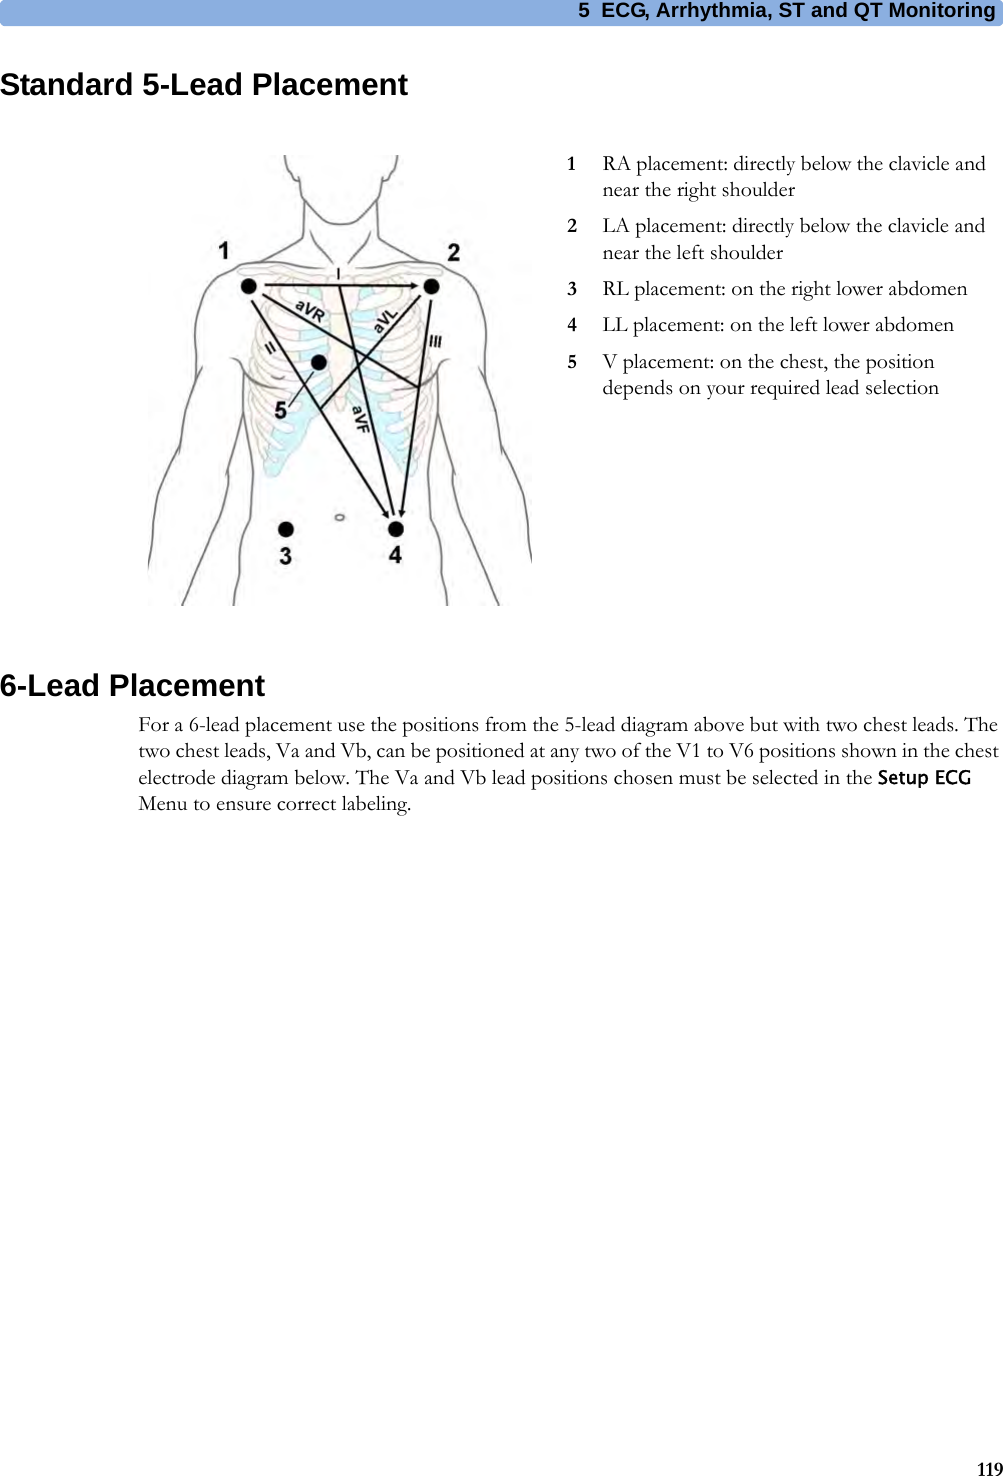 5 ECG, Arrhythmia, ST and QT Monitoring119Standard 5-Lead Placement6-Lead PlacementFor a 6-lead placement use the positions from the 5-lead diagram above but with two chest leads. The two chest leads, Va and Vb, can be positioned at any two of the V1 to V6 positions shown in the chest electrode diagram below. The Va and Vb lead positions chosen must be selected in the Setup ECG Menu to ensure correct labeling.1RA placement: directly below the clavicle and near the right shoulder2LA placement: directly below the clavicle and near the left shoulder3RL placement: on the right lower abdomen4LL placement: on the left lower abdomen5V placement: on the chest, the position depends on your required lead selection